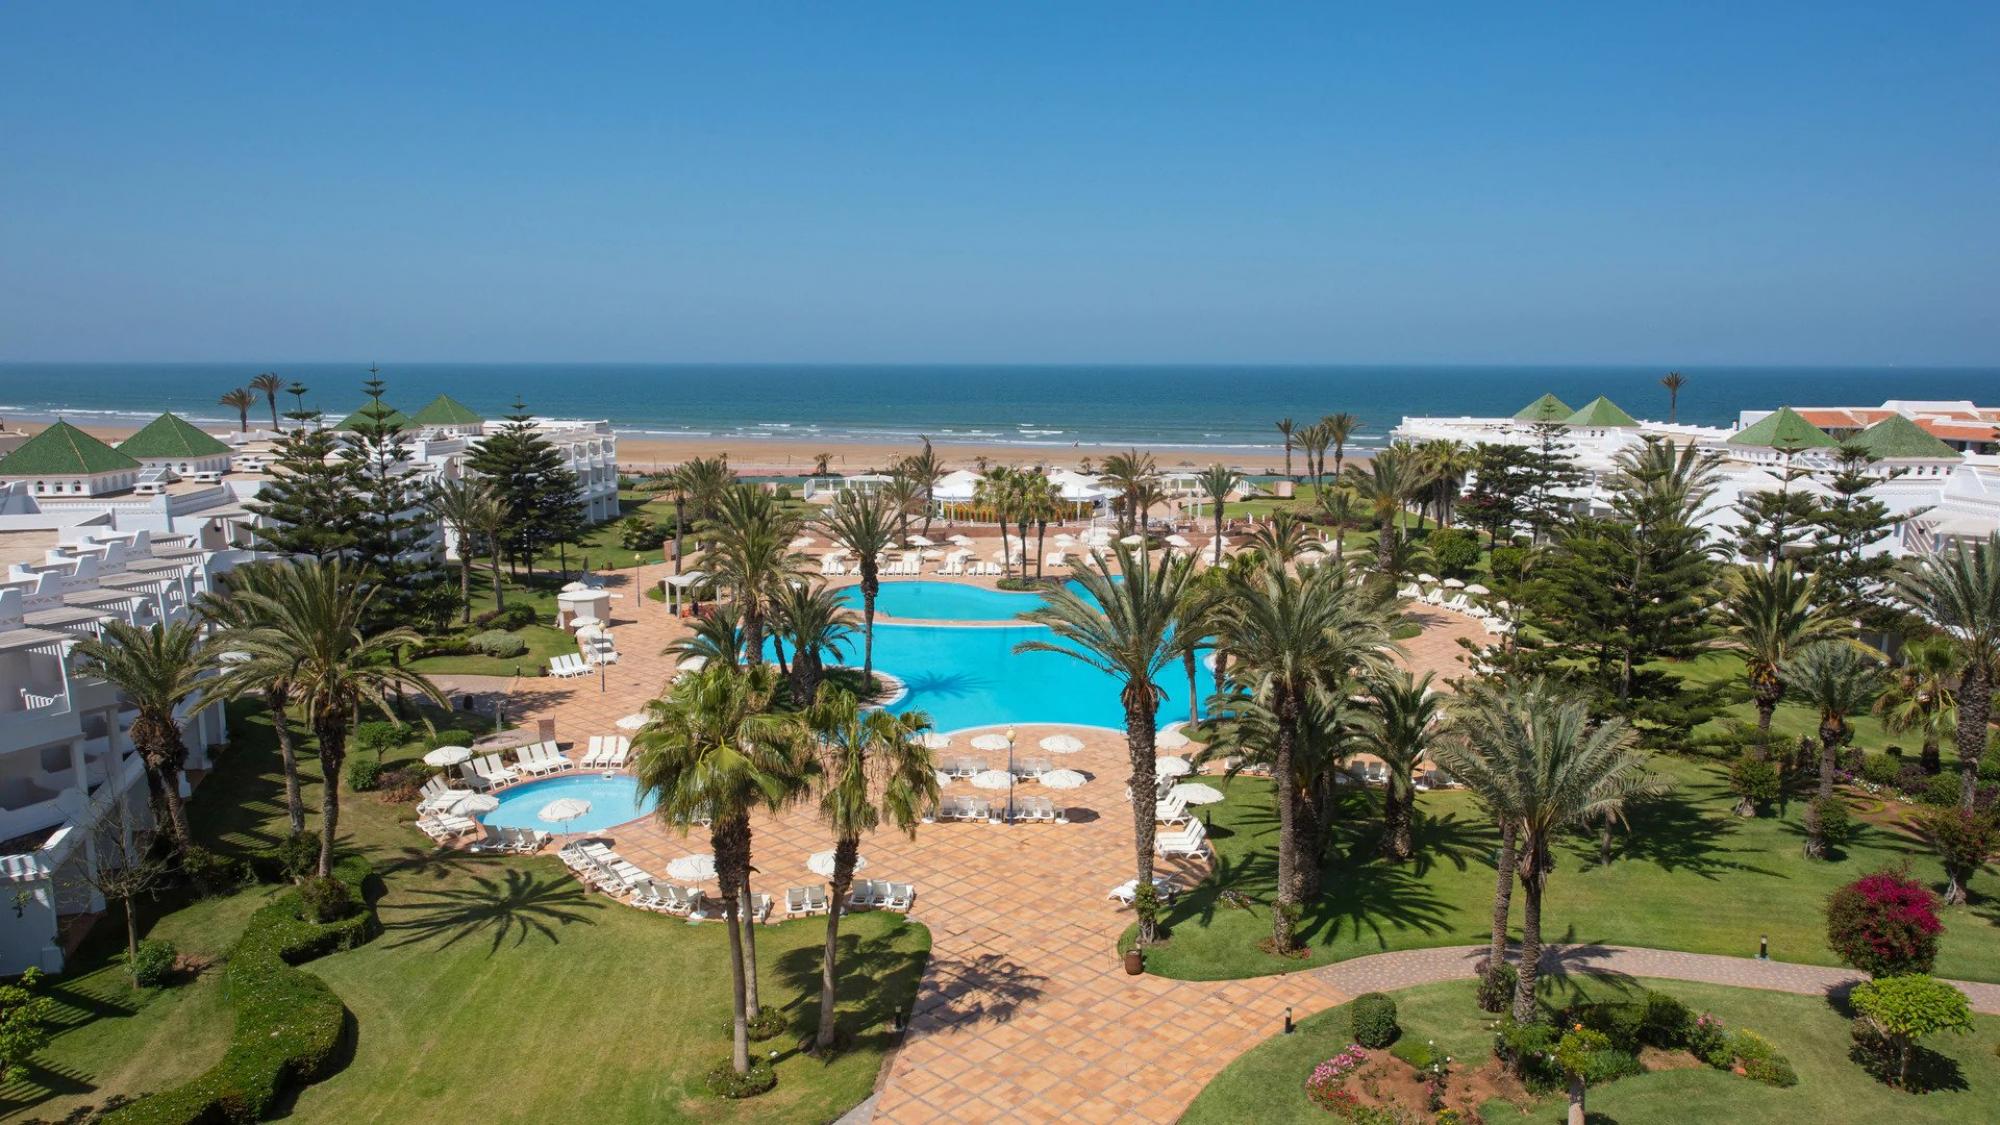 All The Iberostar Founty Beach hotel's picturesque hotel in stunning Morocco.